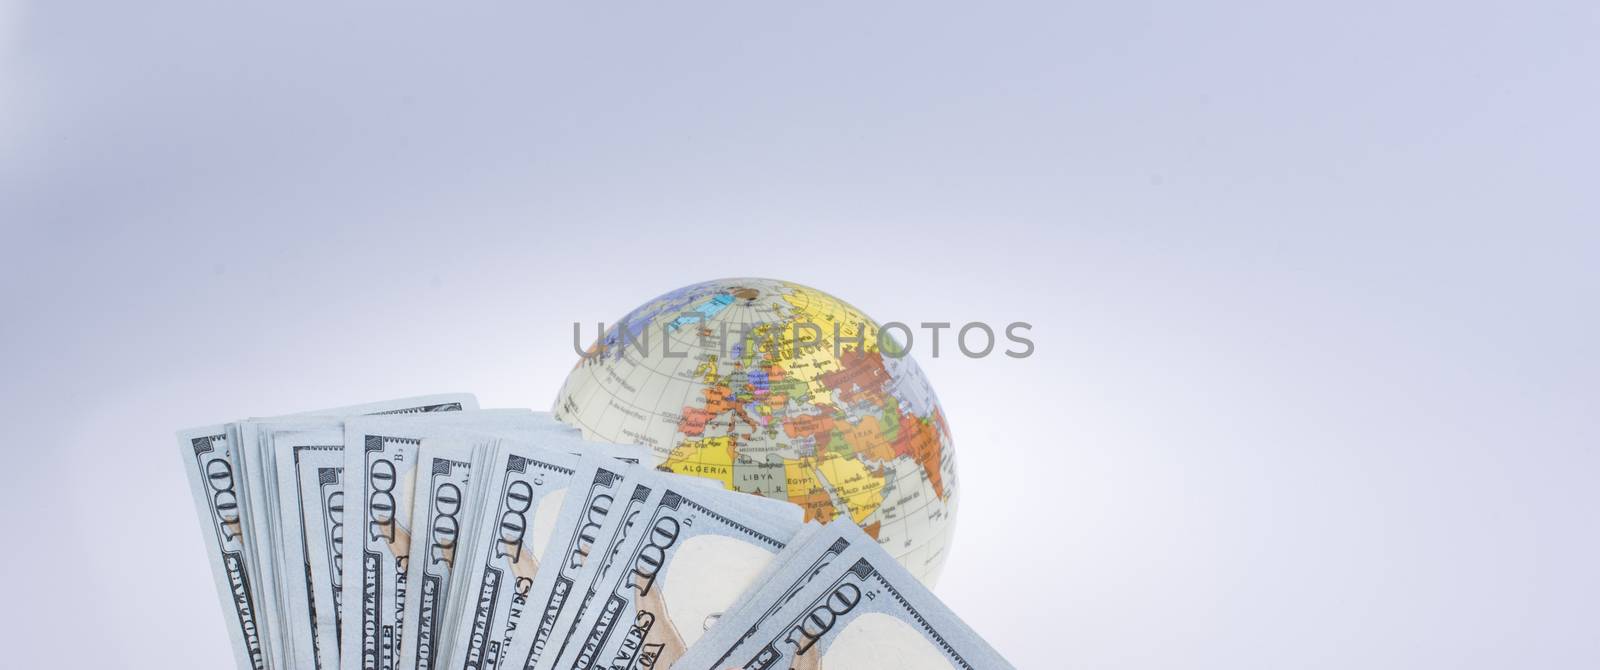 Human hand holding American dollar banknotes by the side of a mo by berkay